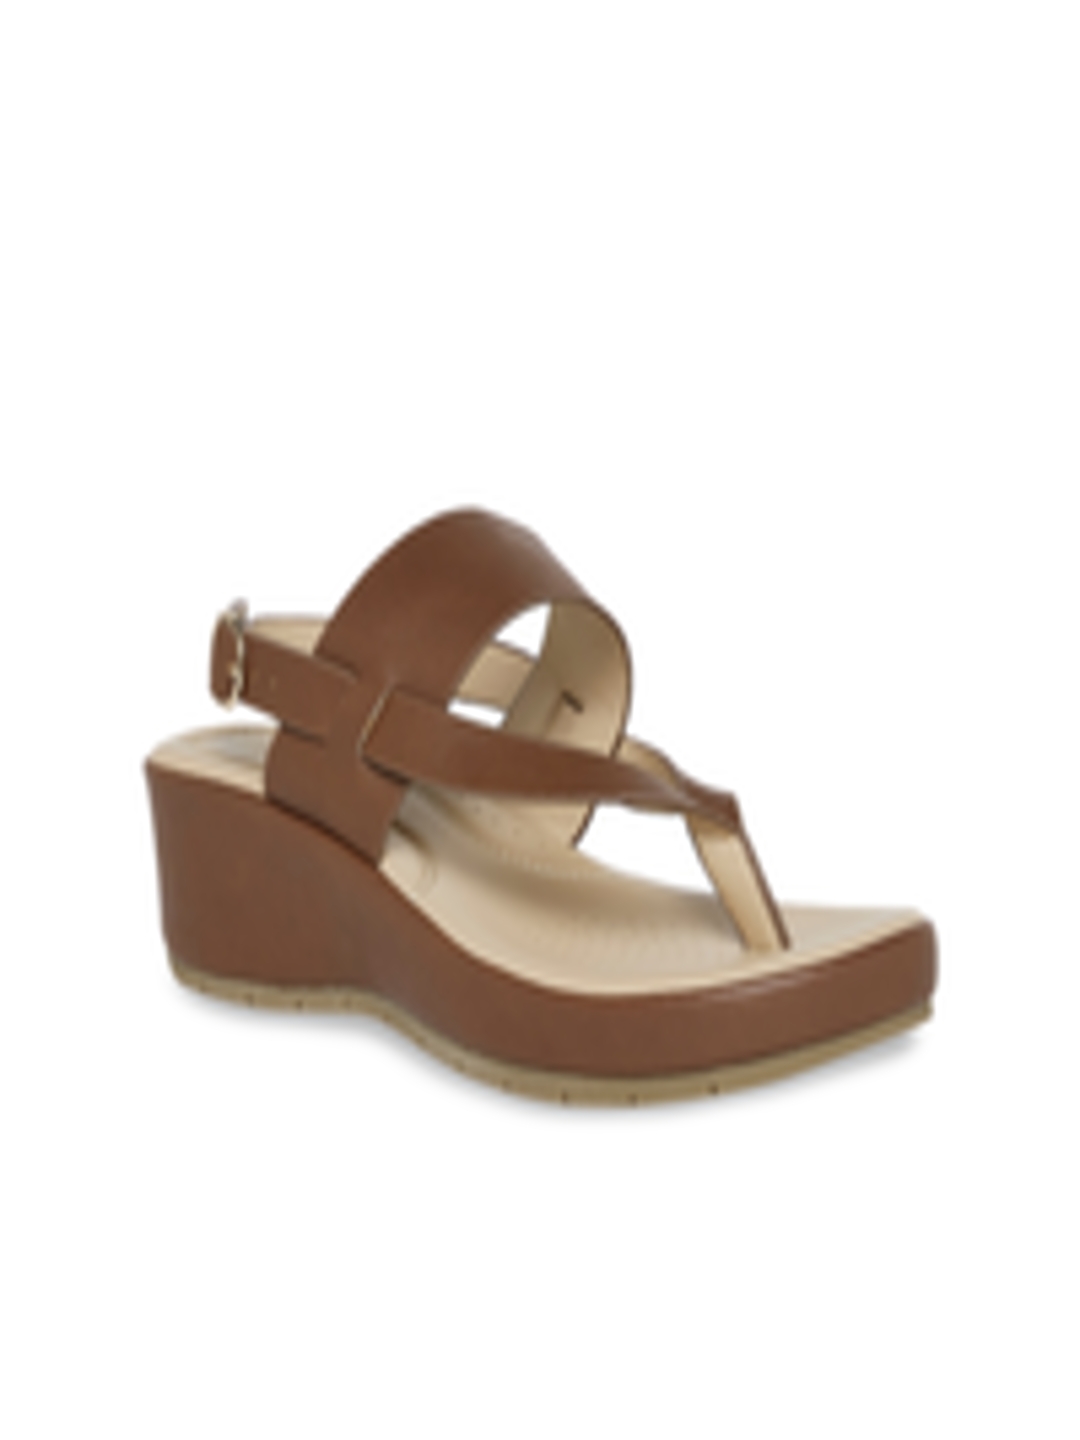 Buy Forever Glam By Pantaloons Tan Leather Wedge Sandals With Buckles ...